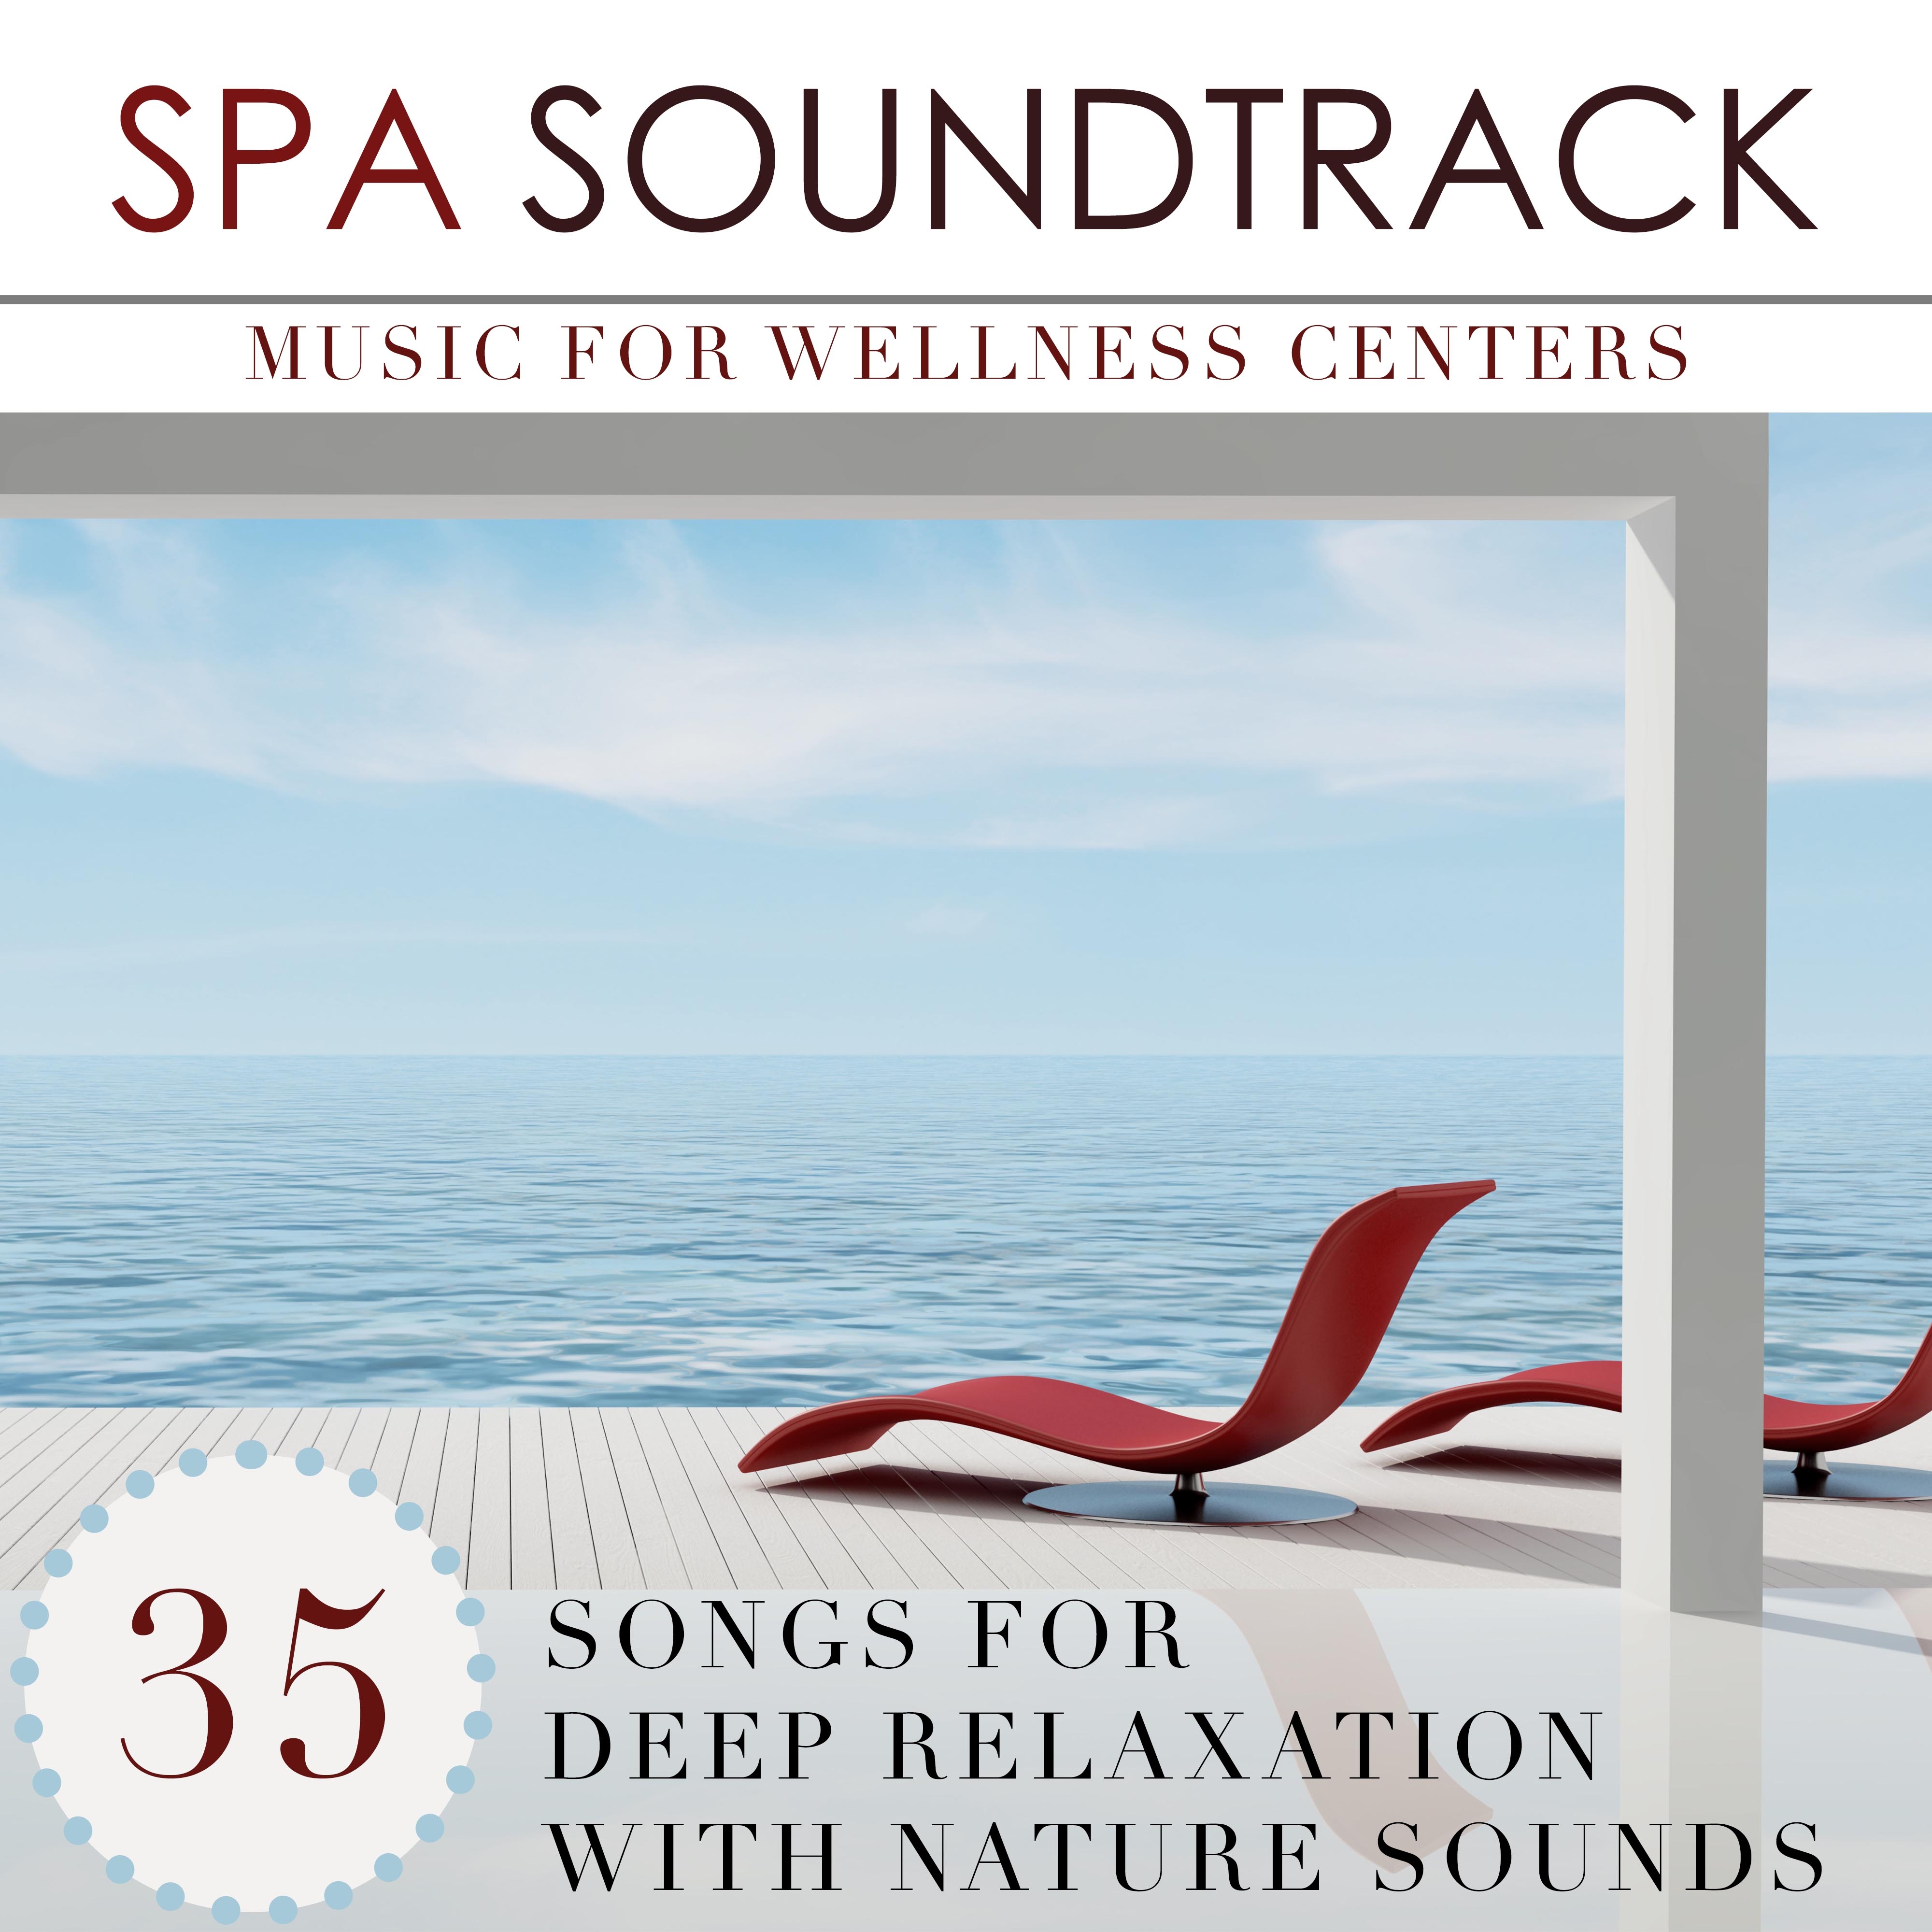 Spa Soundtrack: Music for Wellness Centers for Deep Relaxation with Nature Sounds